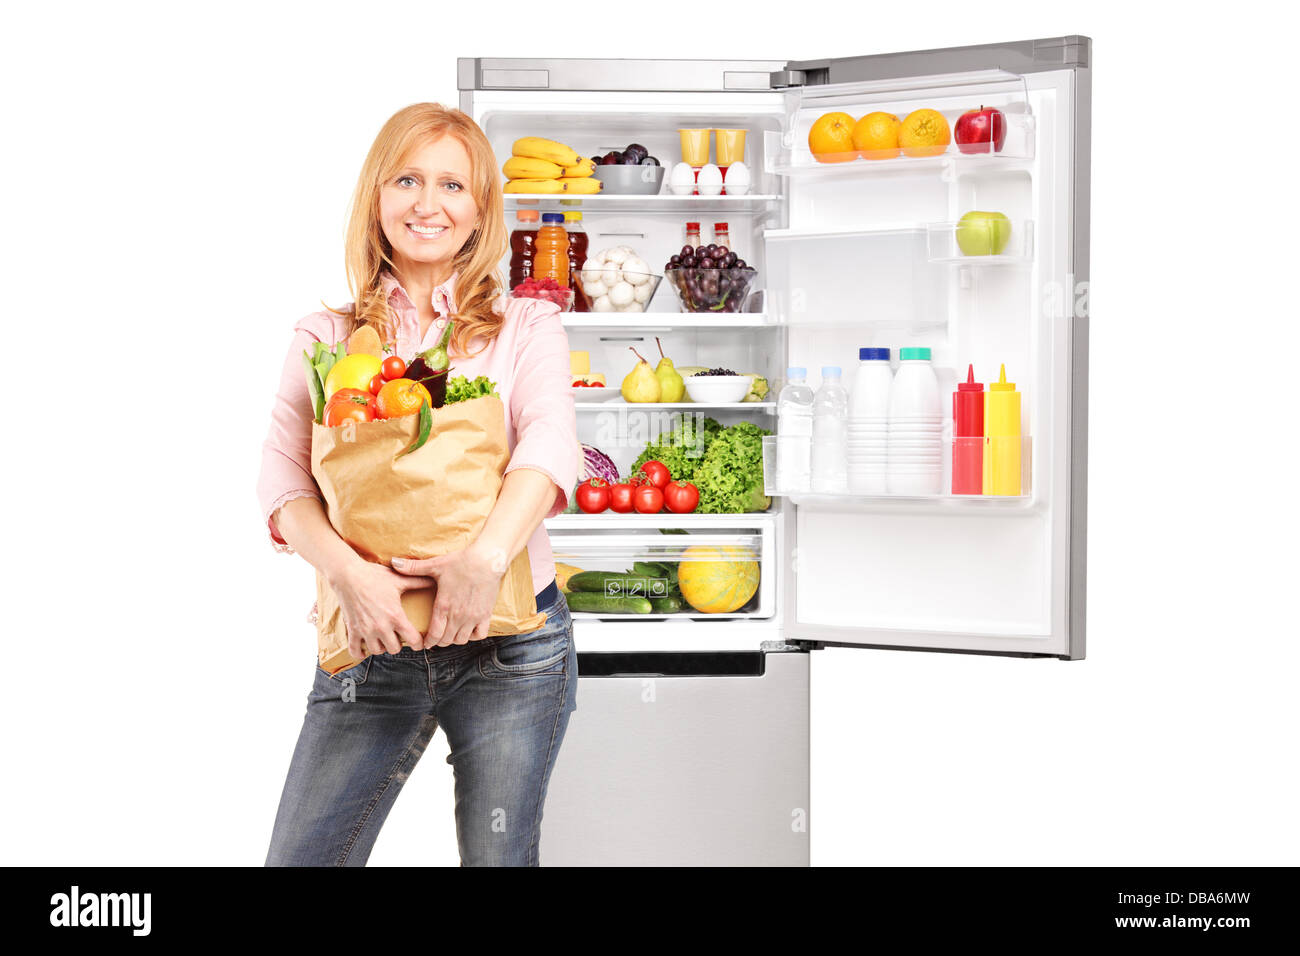 Smiling mature woman holding a paper bag full of groceries in front of refrigerator Stock Photo